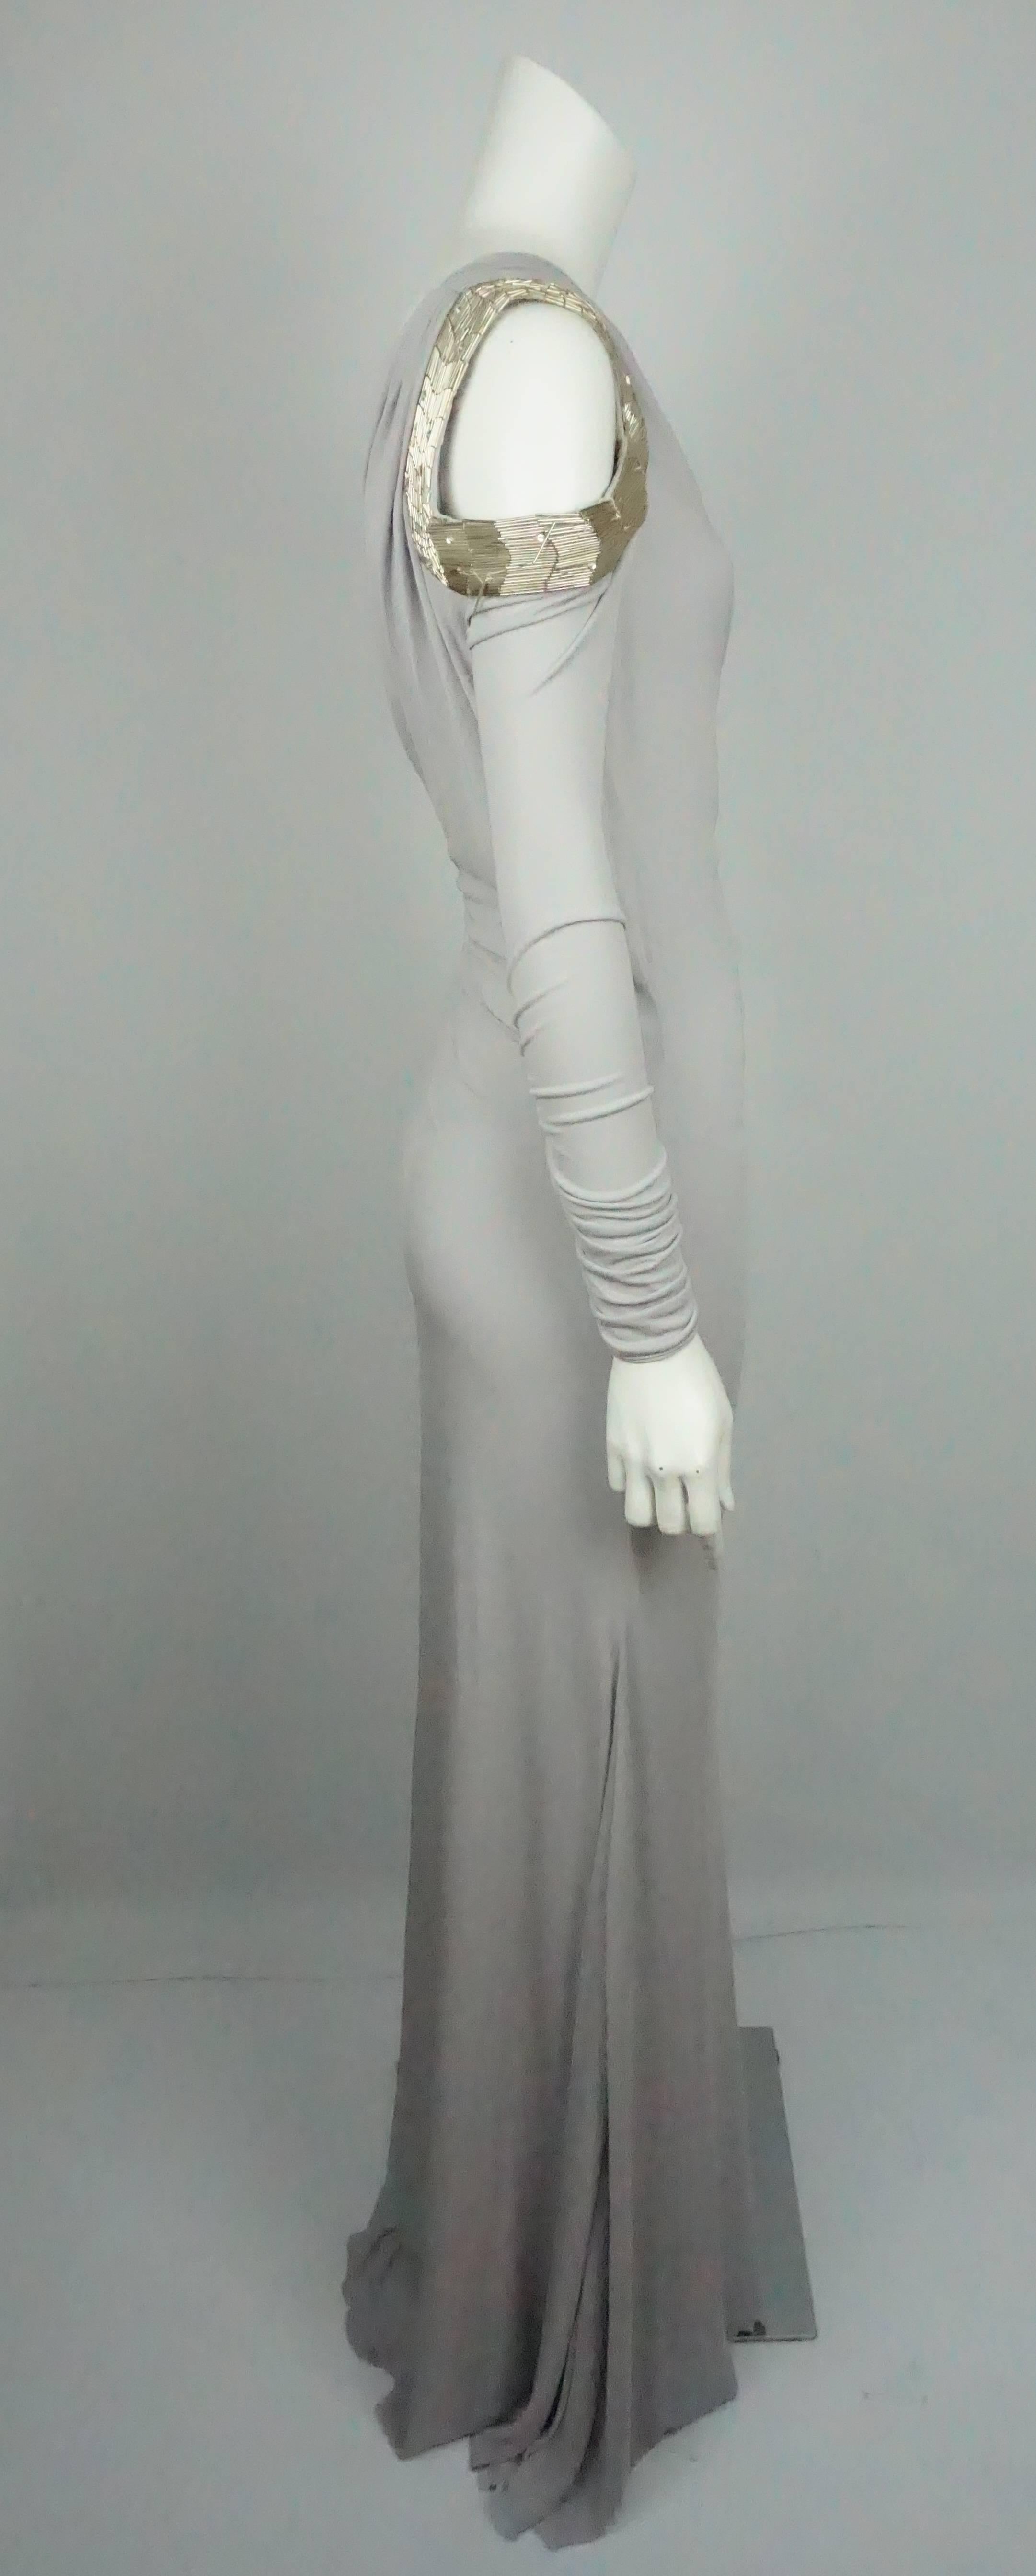 Roberto Cavalli Grey Silk Jersey One Shoulder Beaded Gown - 42  This beautiful gown is in good condition. The dress is made of a poly-blend material and is lined in silk. The dress is a one shoulder that is long sleeve and has a ruching detail on